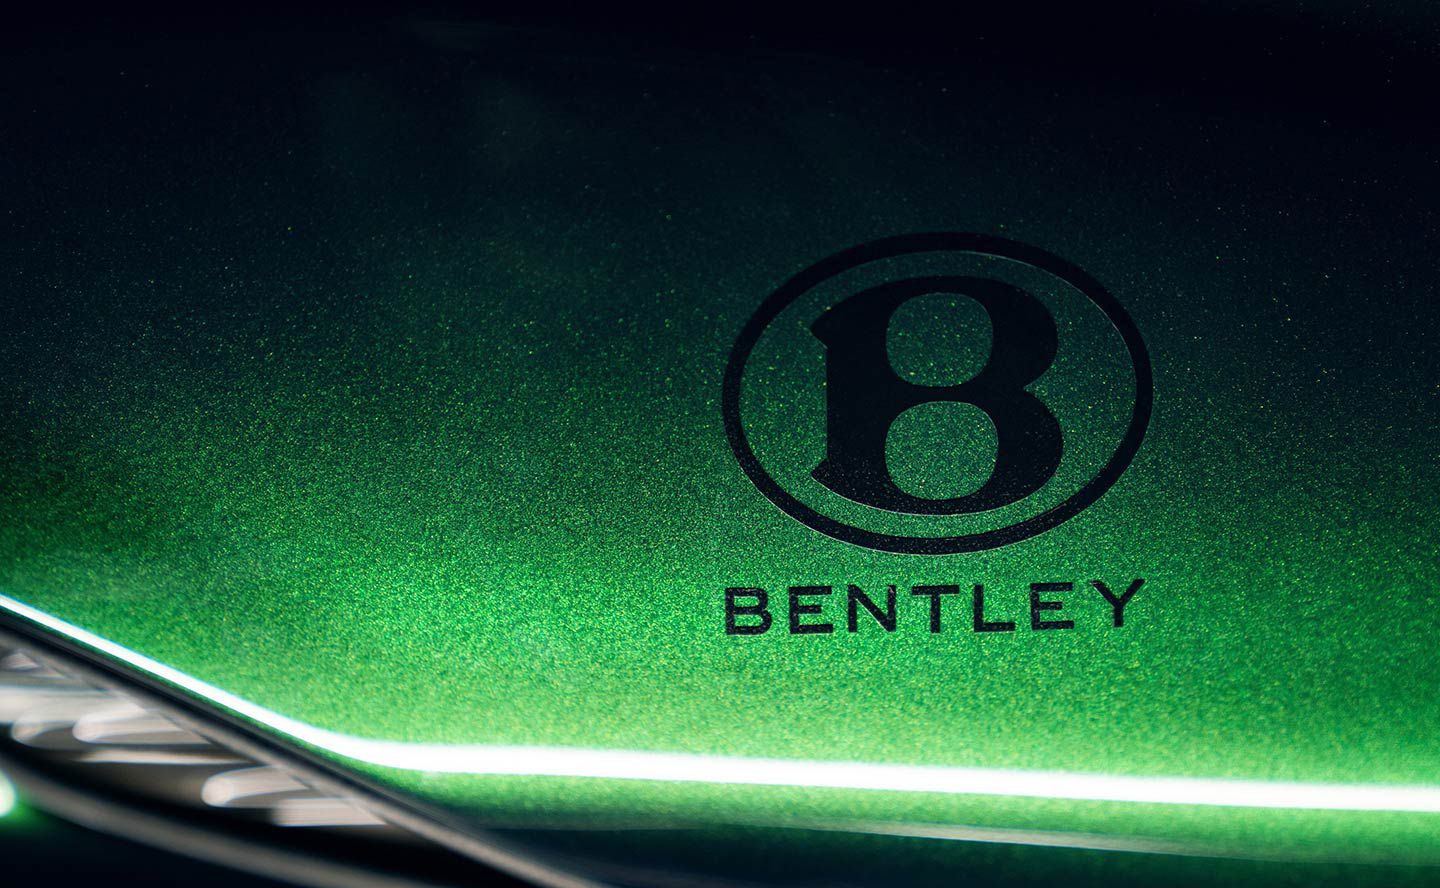 Ducati and Bentley Teamed up for a Luxurious Limited-Edition